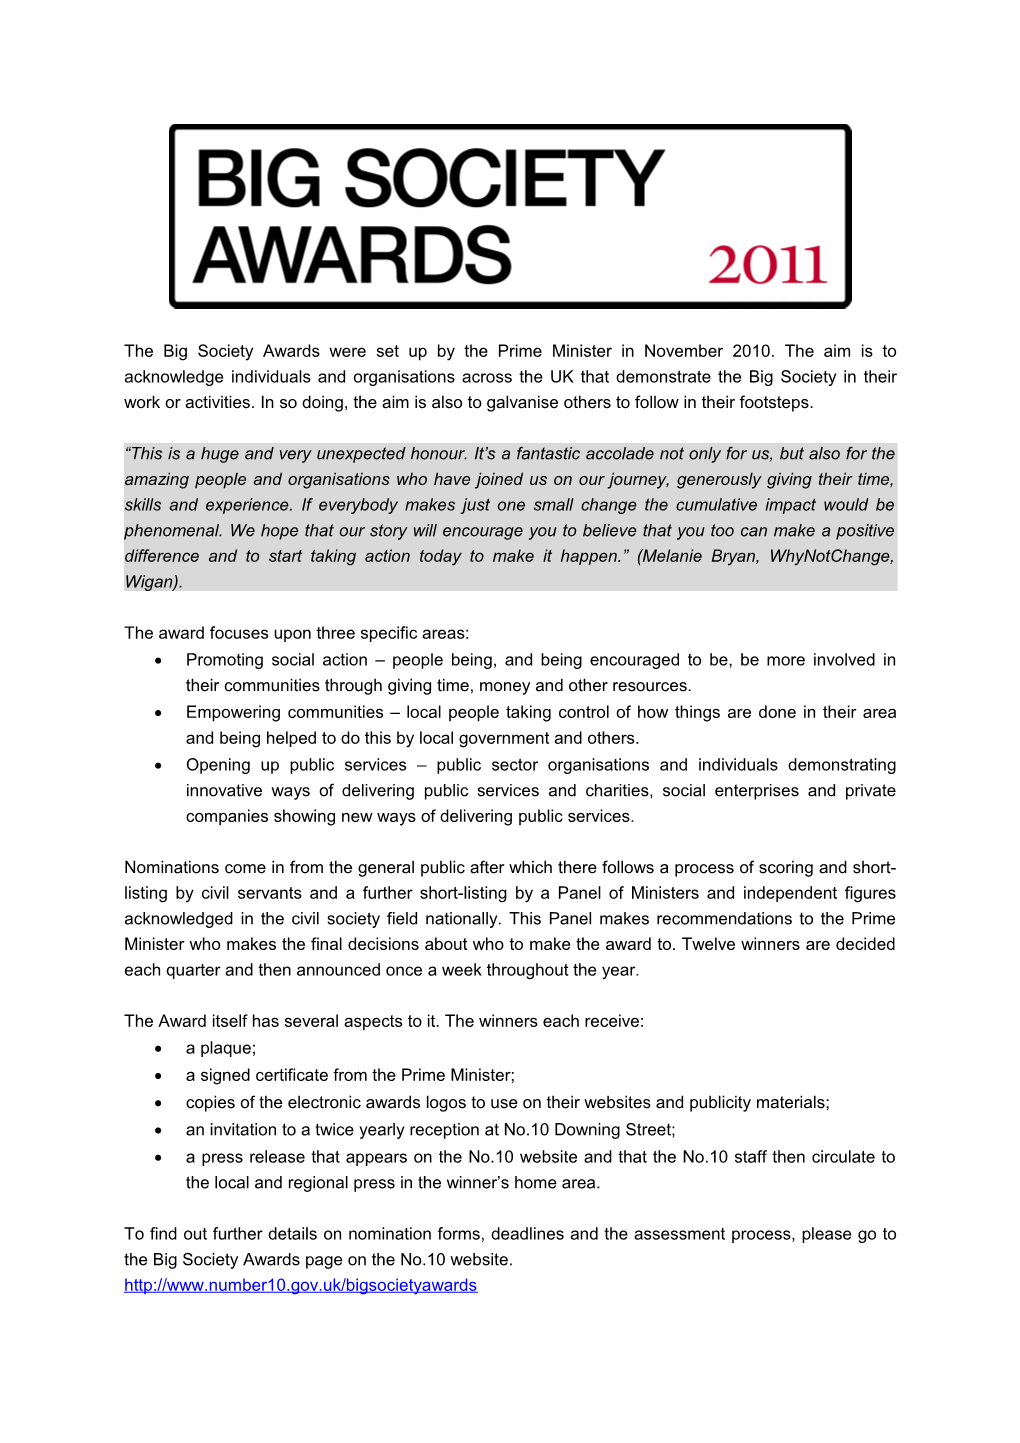 The Award Focuses Upon Three Specific Areas